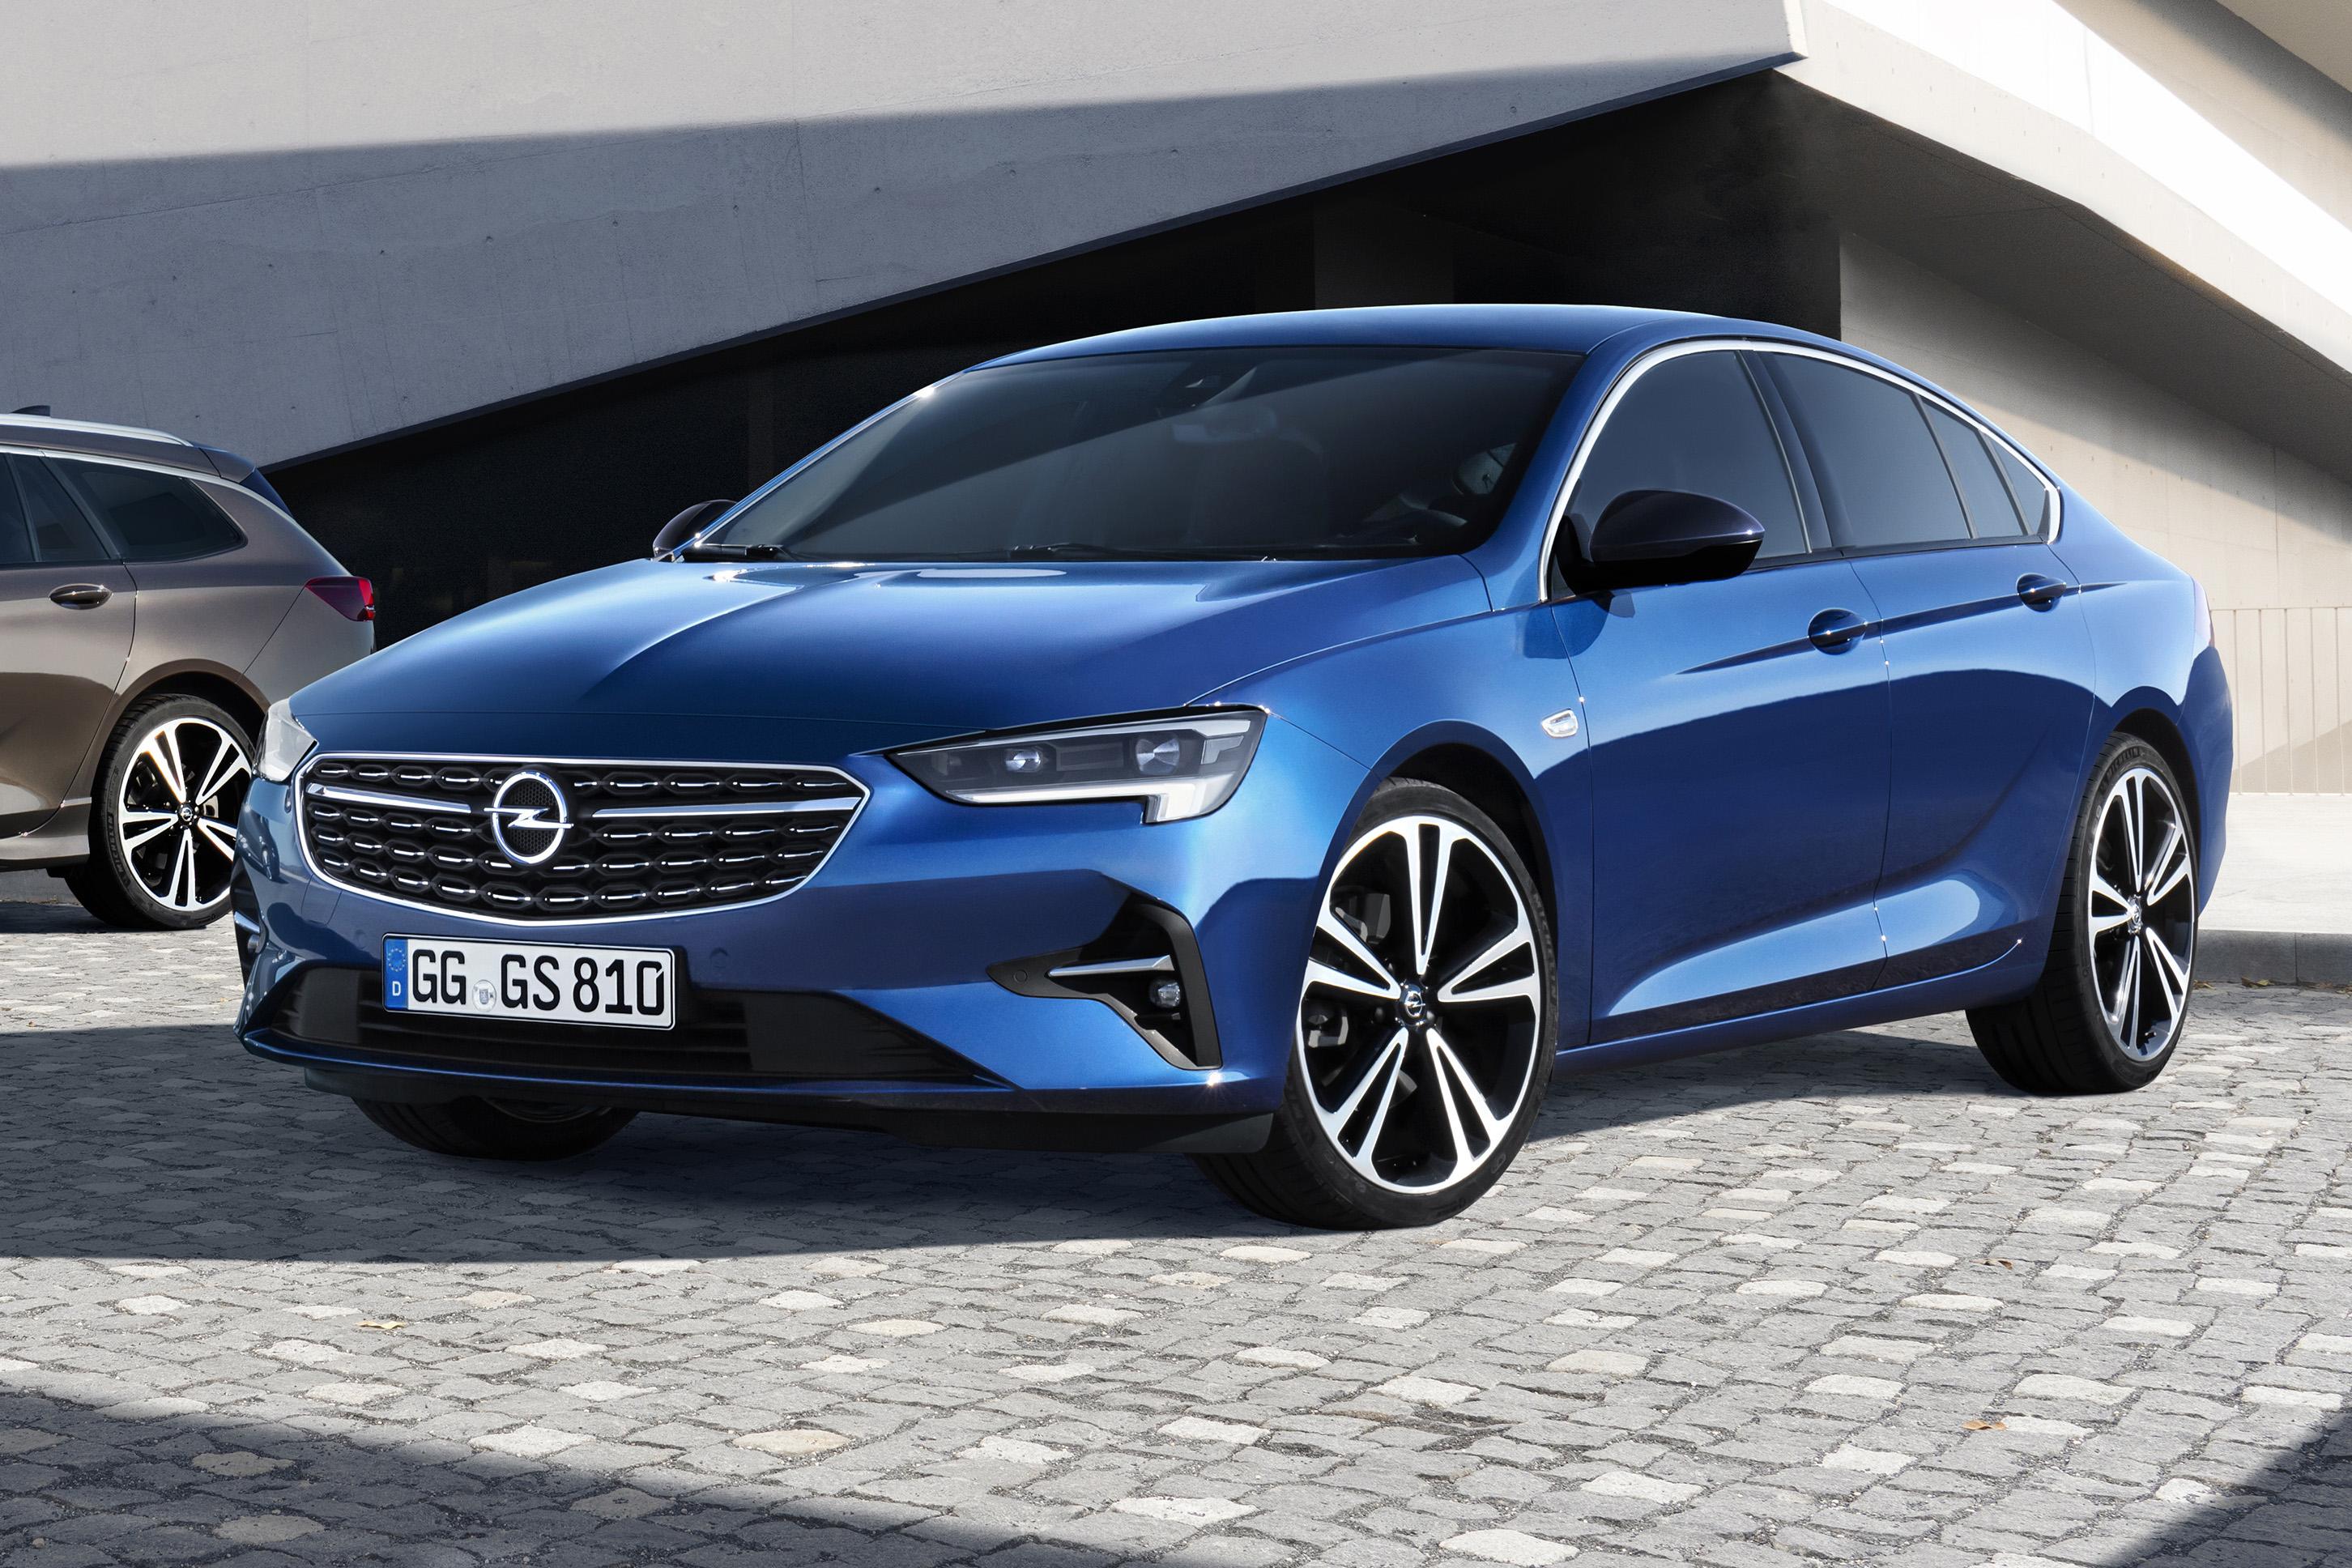 2020 Opel/Vauxhall Astra Leaves A Good Chunk Of Its GM Legacy